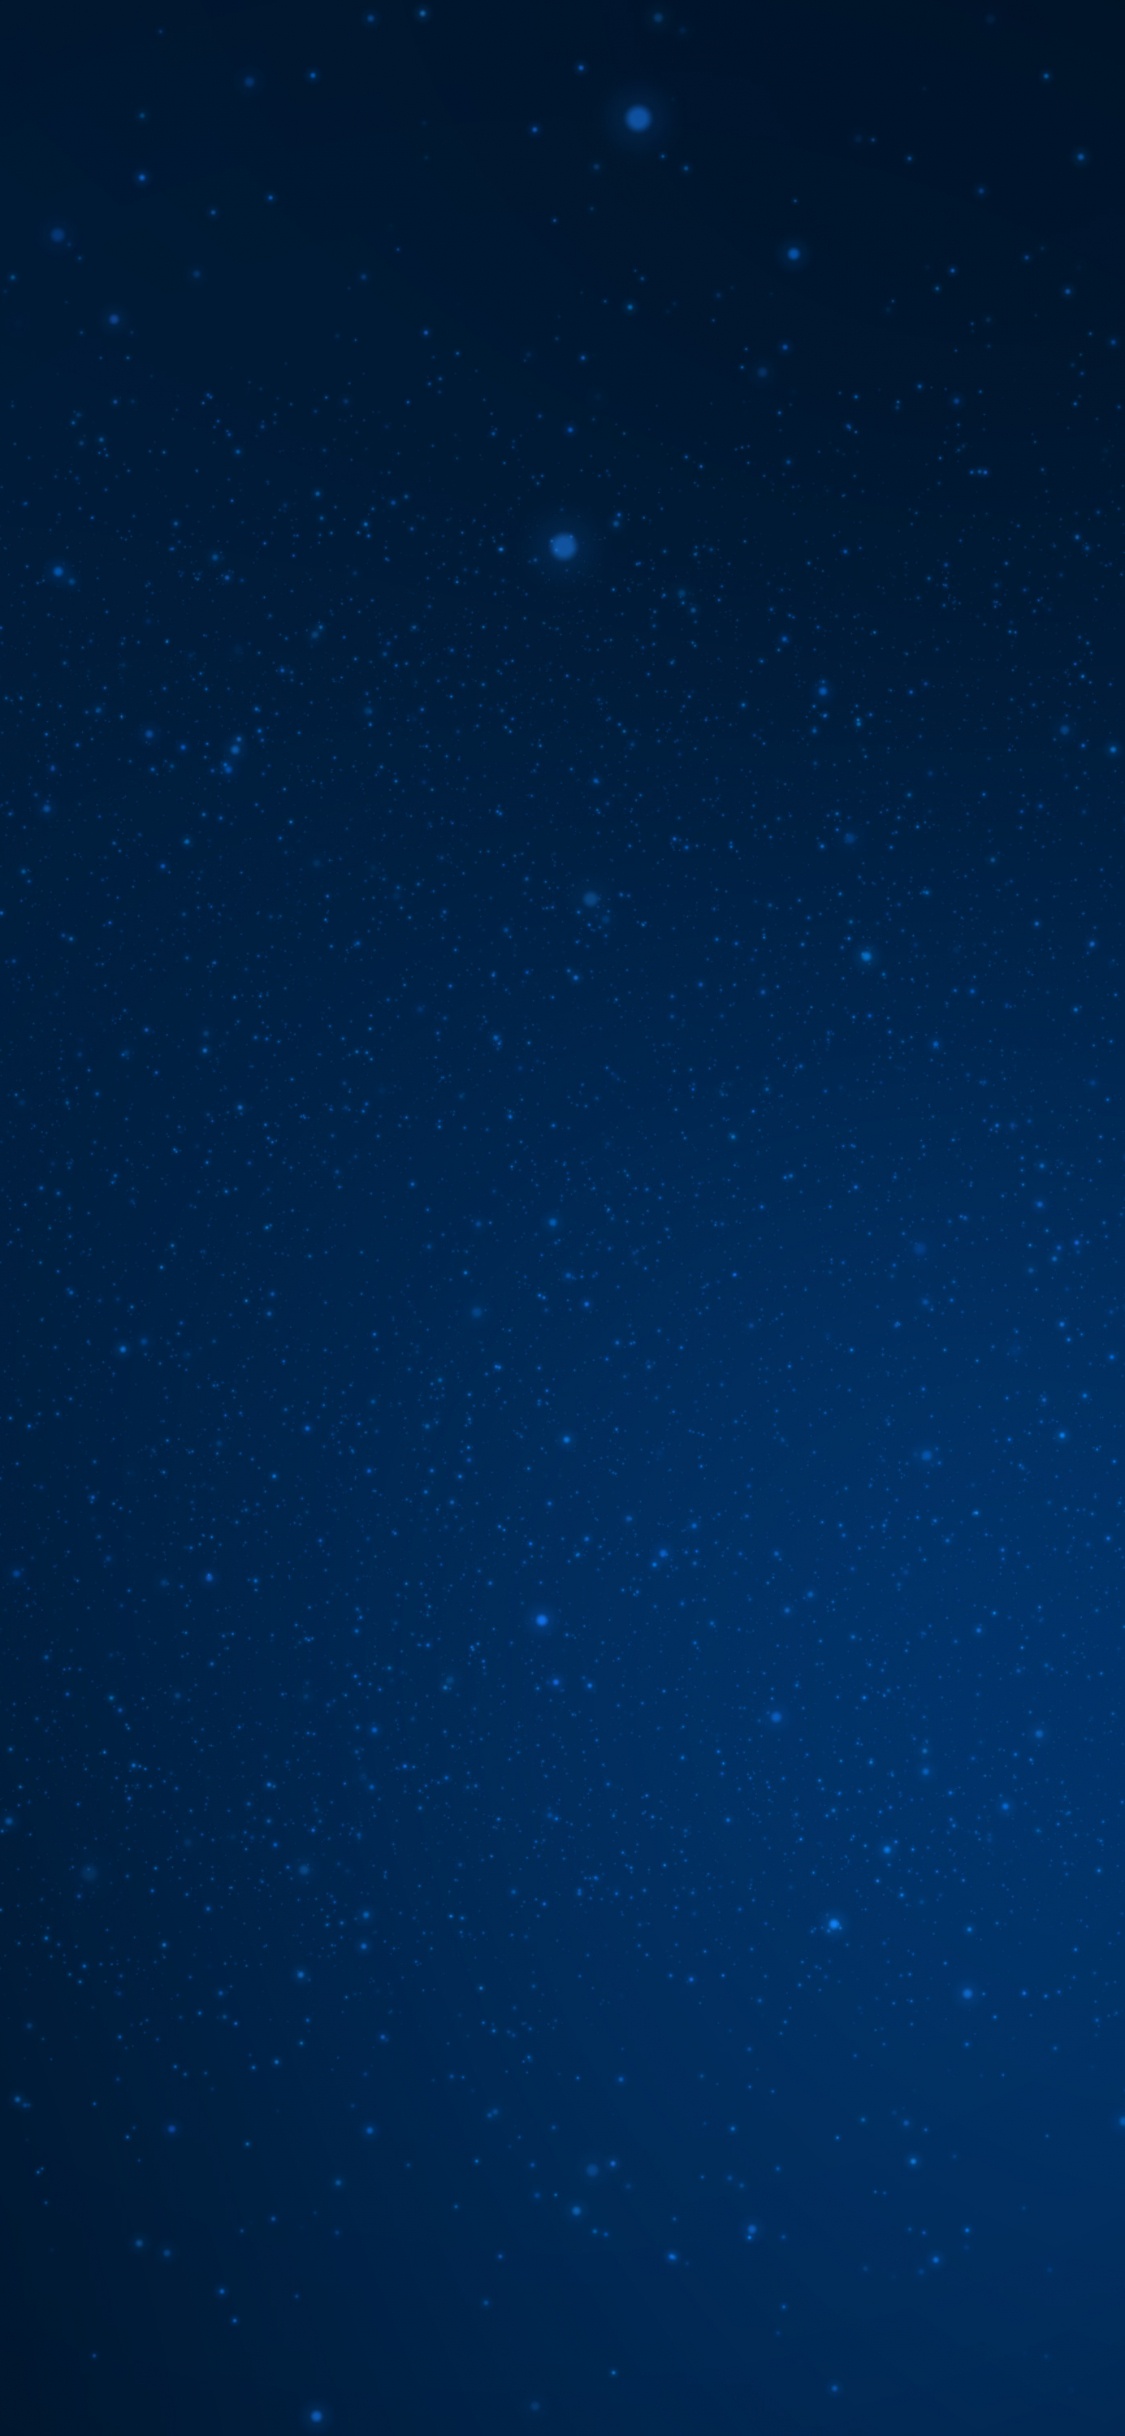 Blue Sky With Stars During Night Time. Wallpaper in 1125x2436 Resolution